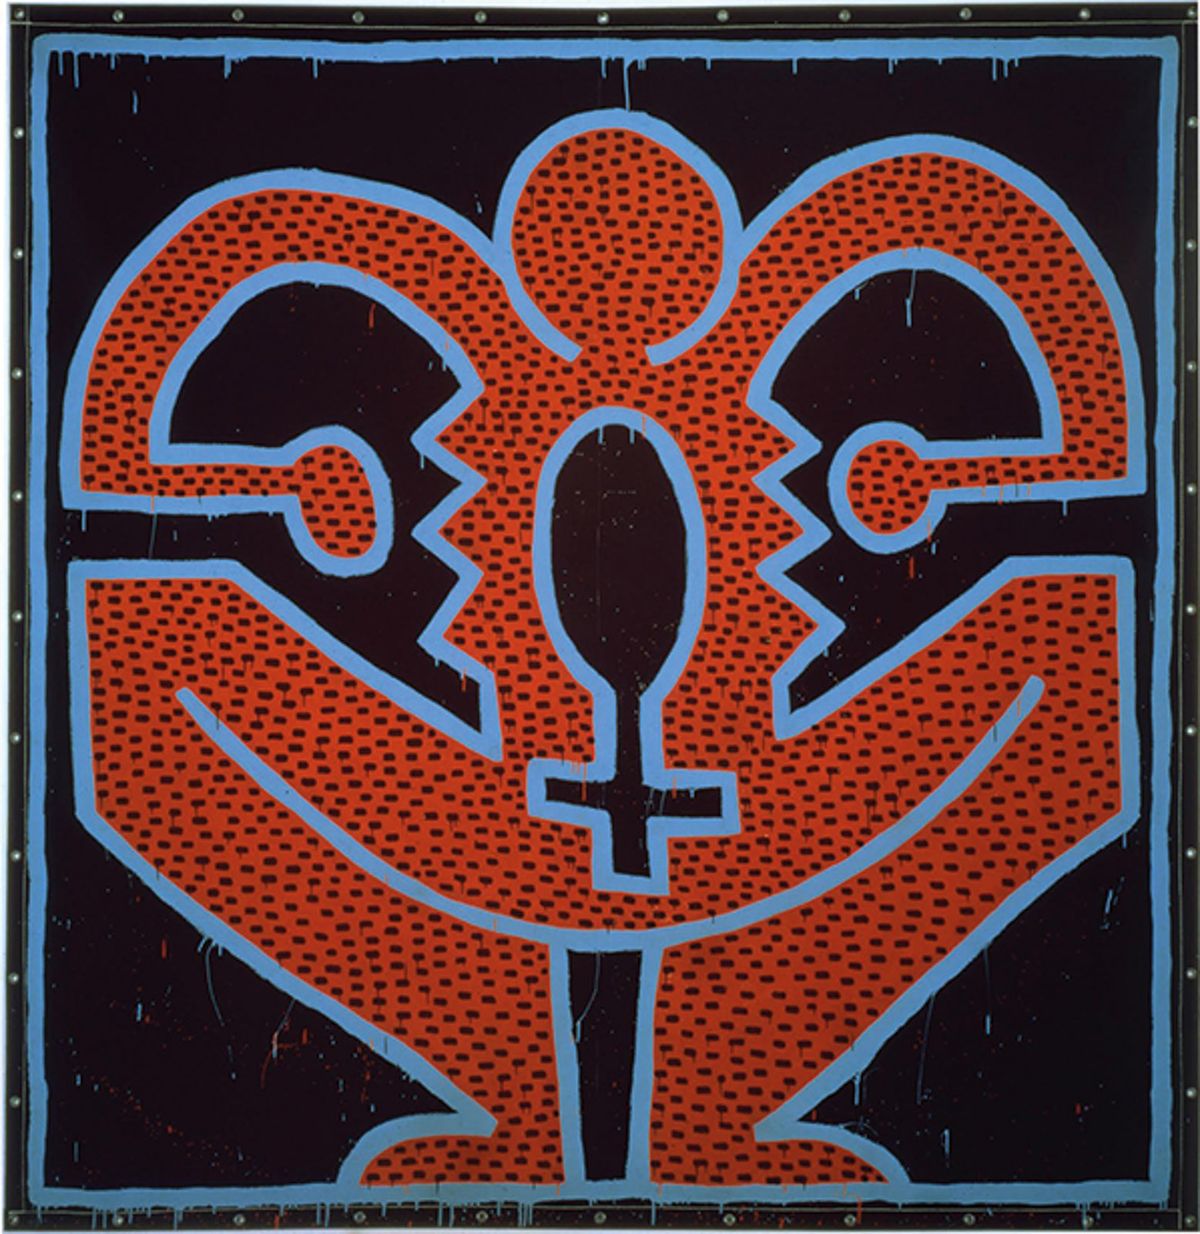 Keith Haring’s canvas tarpaulin painting Untitled (1983) was one of the works to be sold by Edelman Courtesy of Edelman Arts